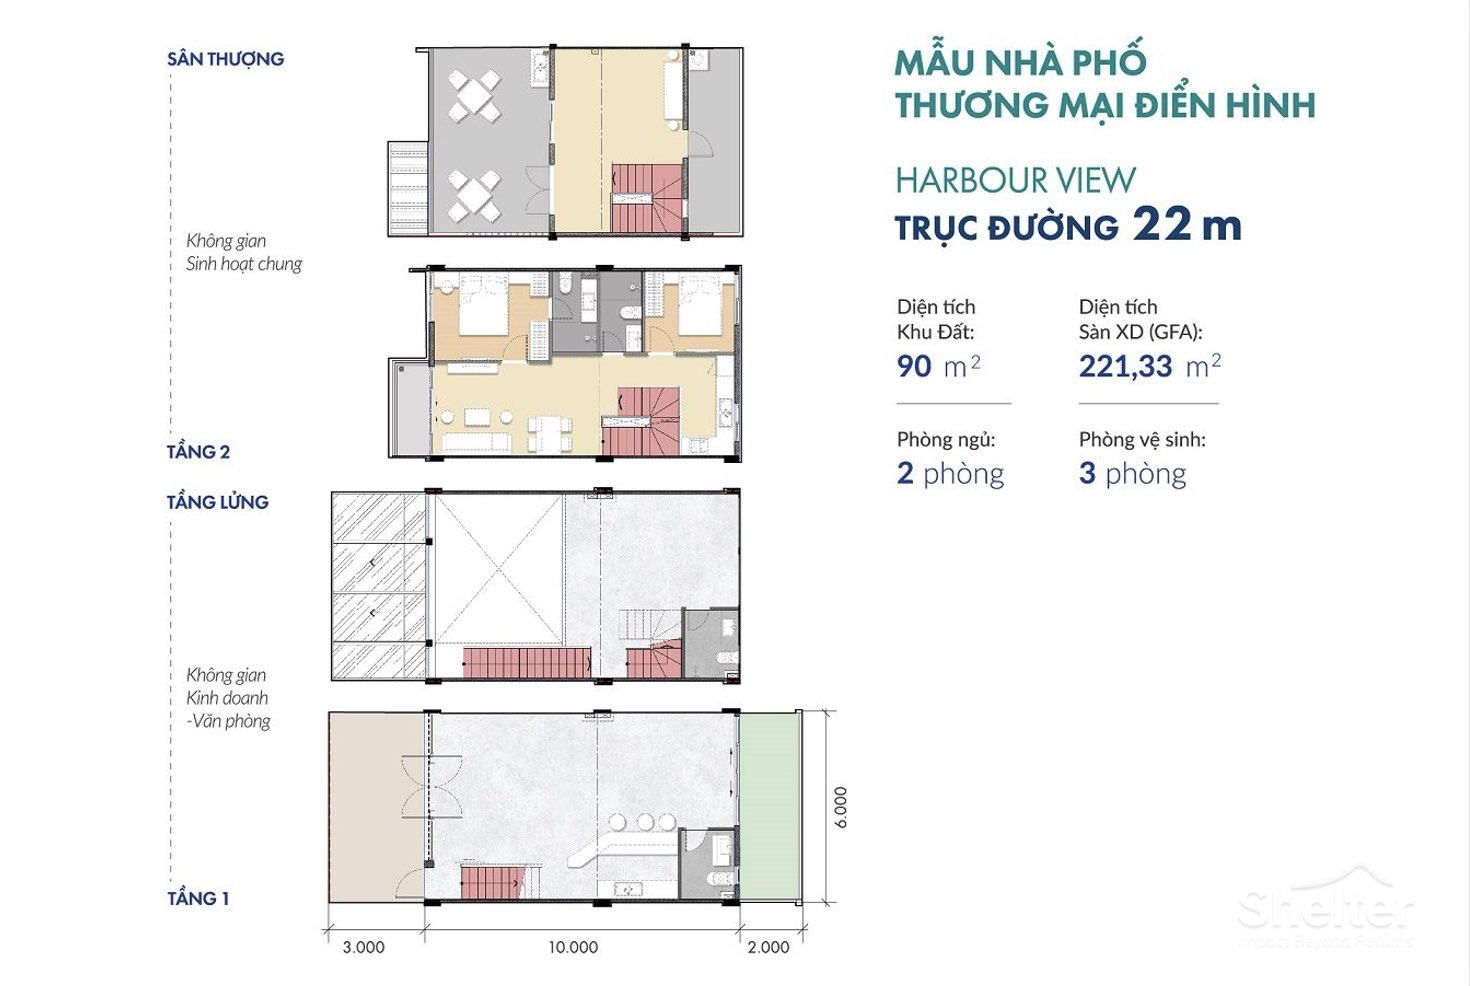 shophouse-waterpoint-layout-harborview-22m